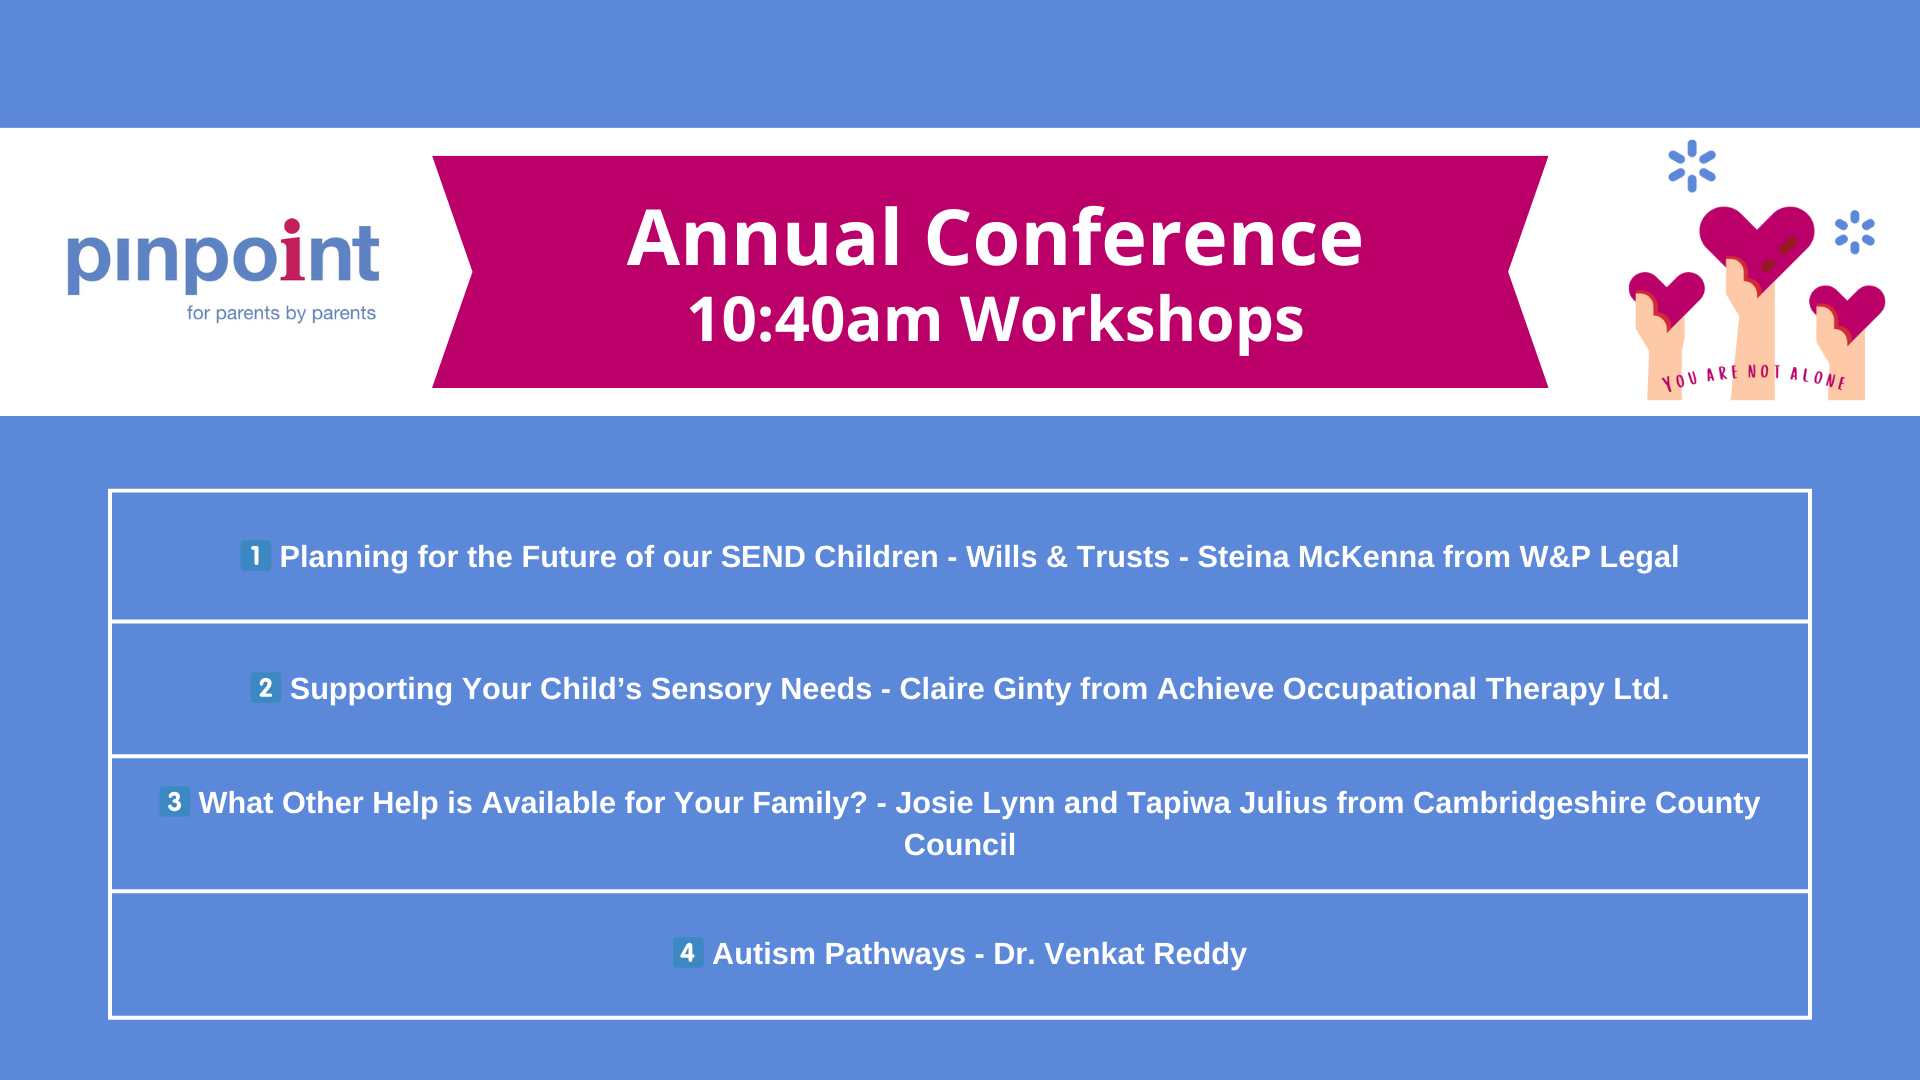 Annual Conference 10:40 Workshops